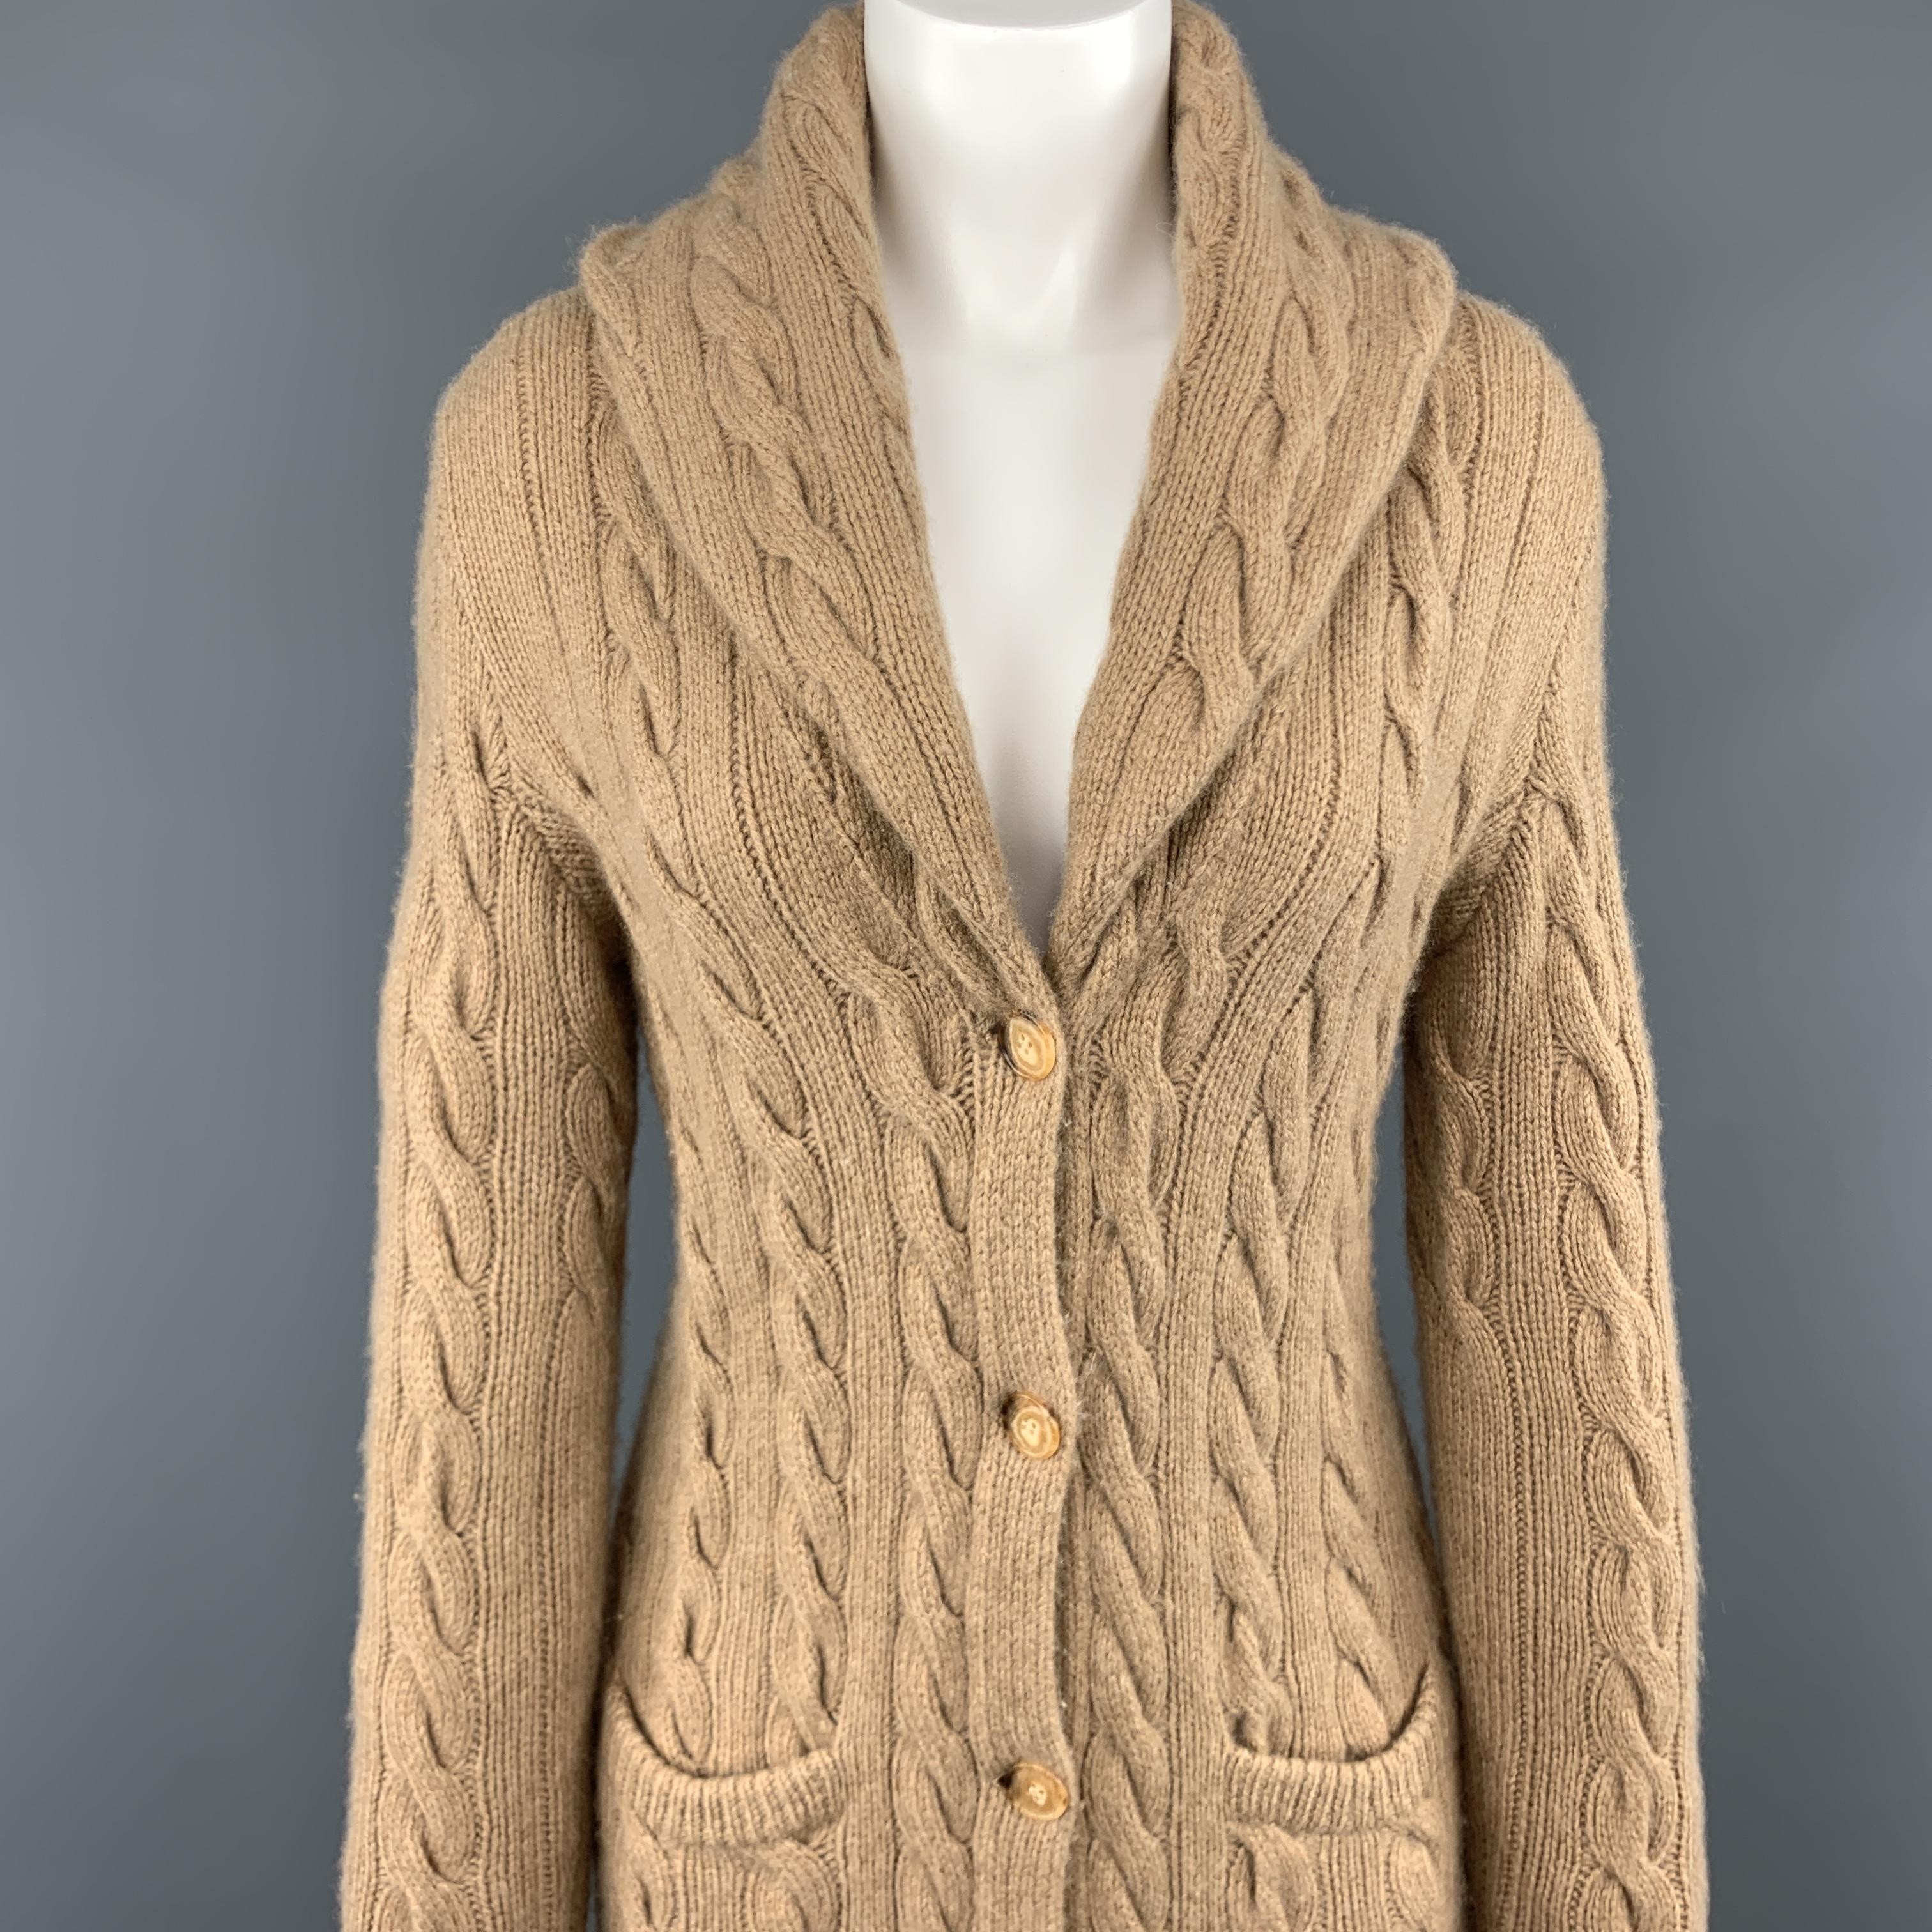 RALPH LAUREN BLACK LABEL log line cardigan comes in camel beige hand cableknit cashmere with a shawl collar, pockets, and long sleeves. 

Excellent Pre-Owned Condition.
Marked: S

Measurements:

Shoulder: 15 in.
Bust: 34 in.
Waist: 29 in.
Hip: 34